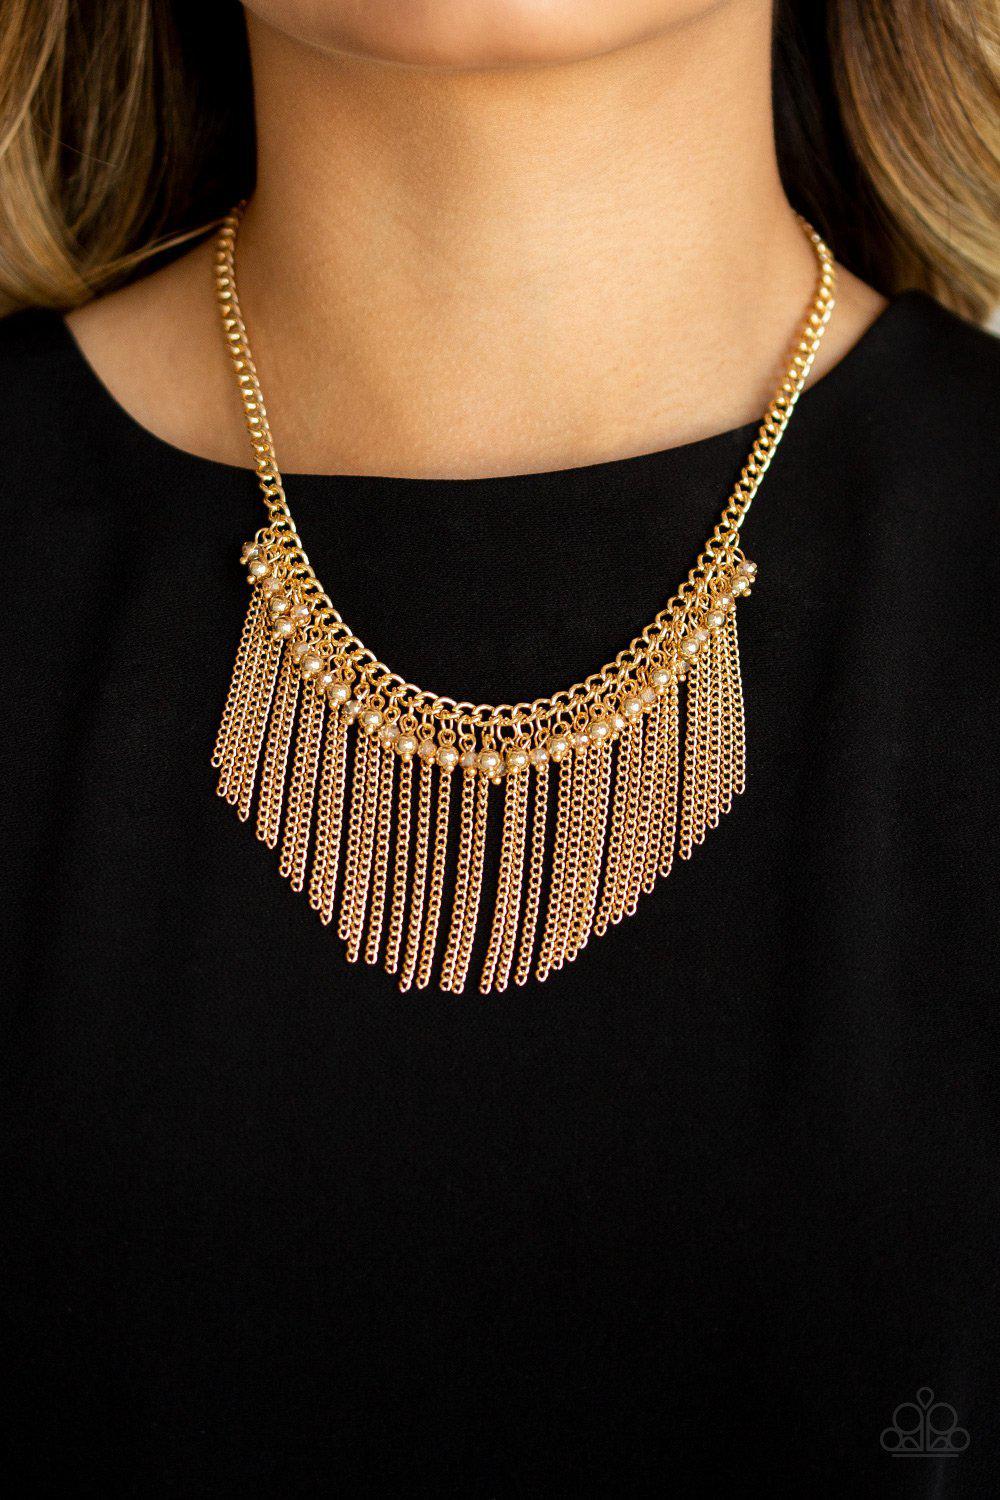 Divinely Diva Gold Fringe Necklace - Paparazzi Accessories - lightbox -CarasShop.com - $5 Jewelry by Cara Jewels